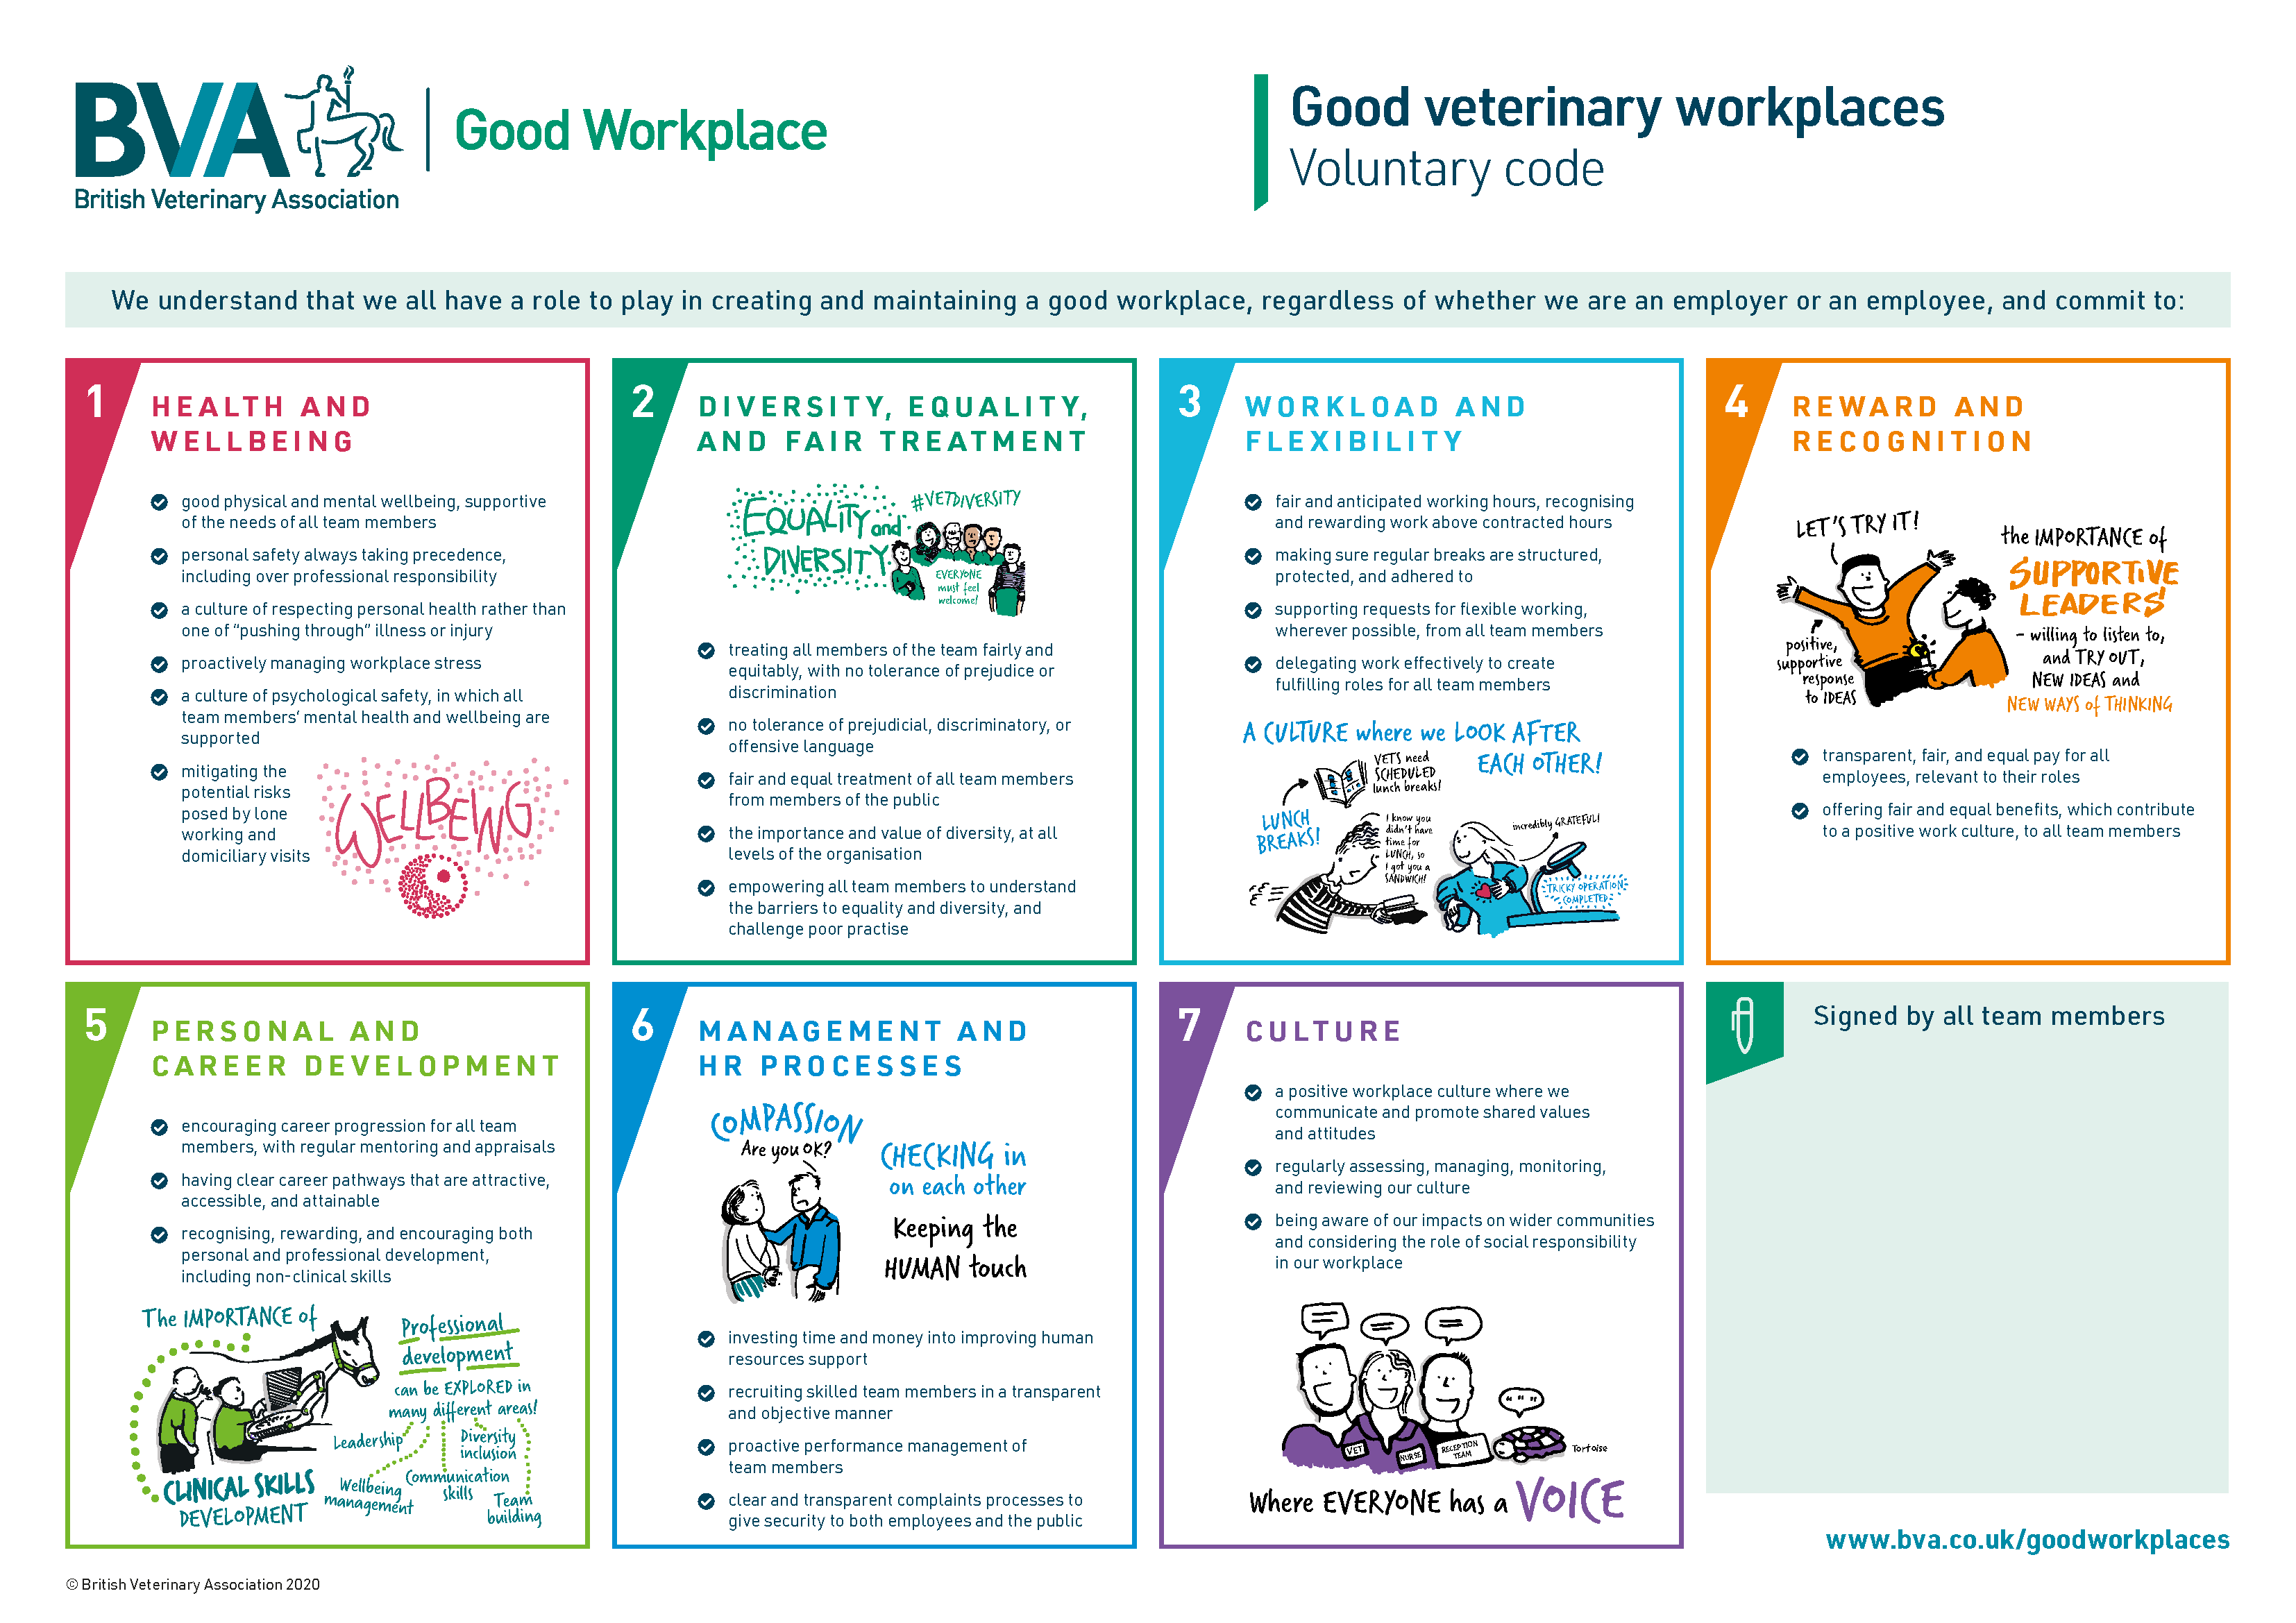 BVA issues rallying call for veterinary settings to commit to its Good Veterinary Workplaces Voluntary Code Image